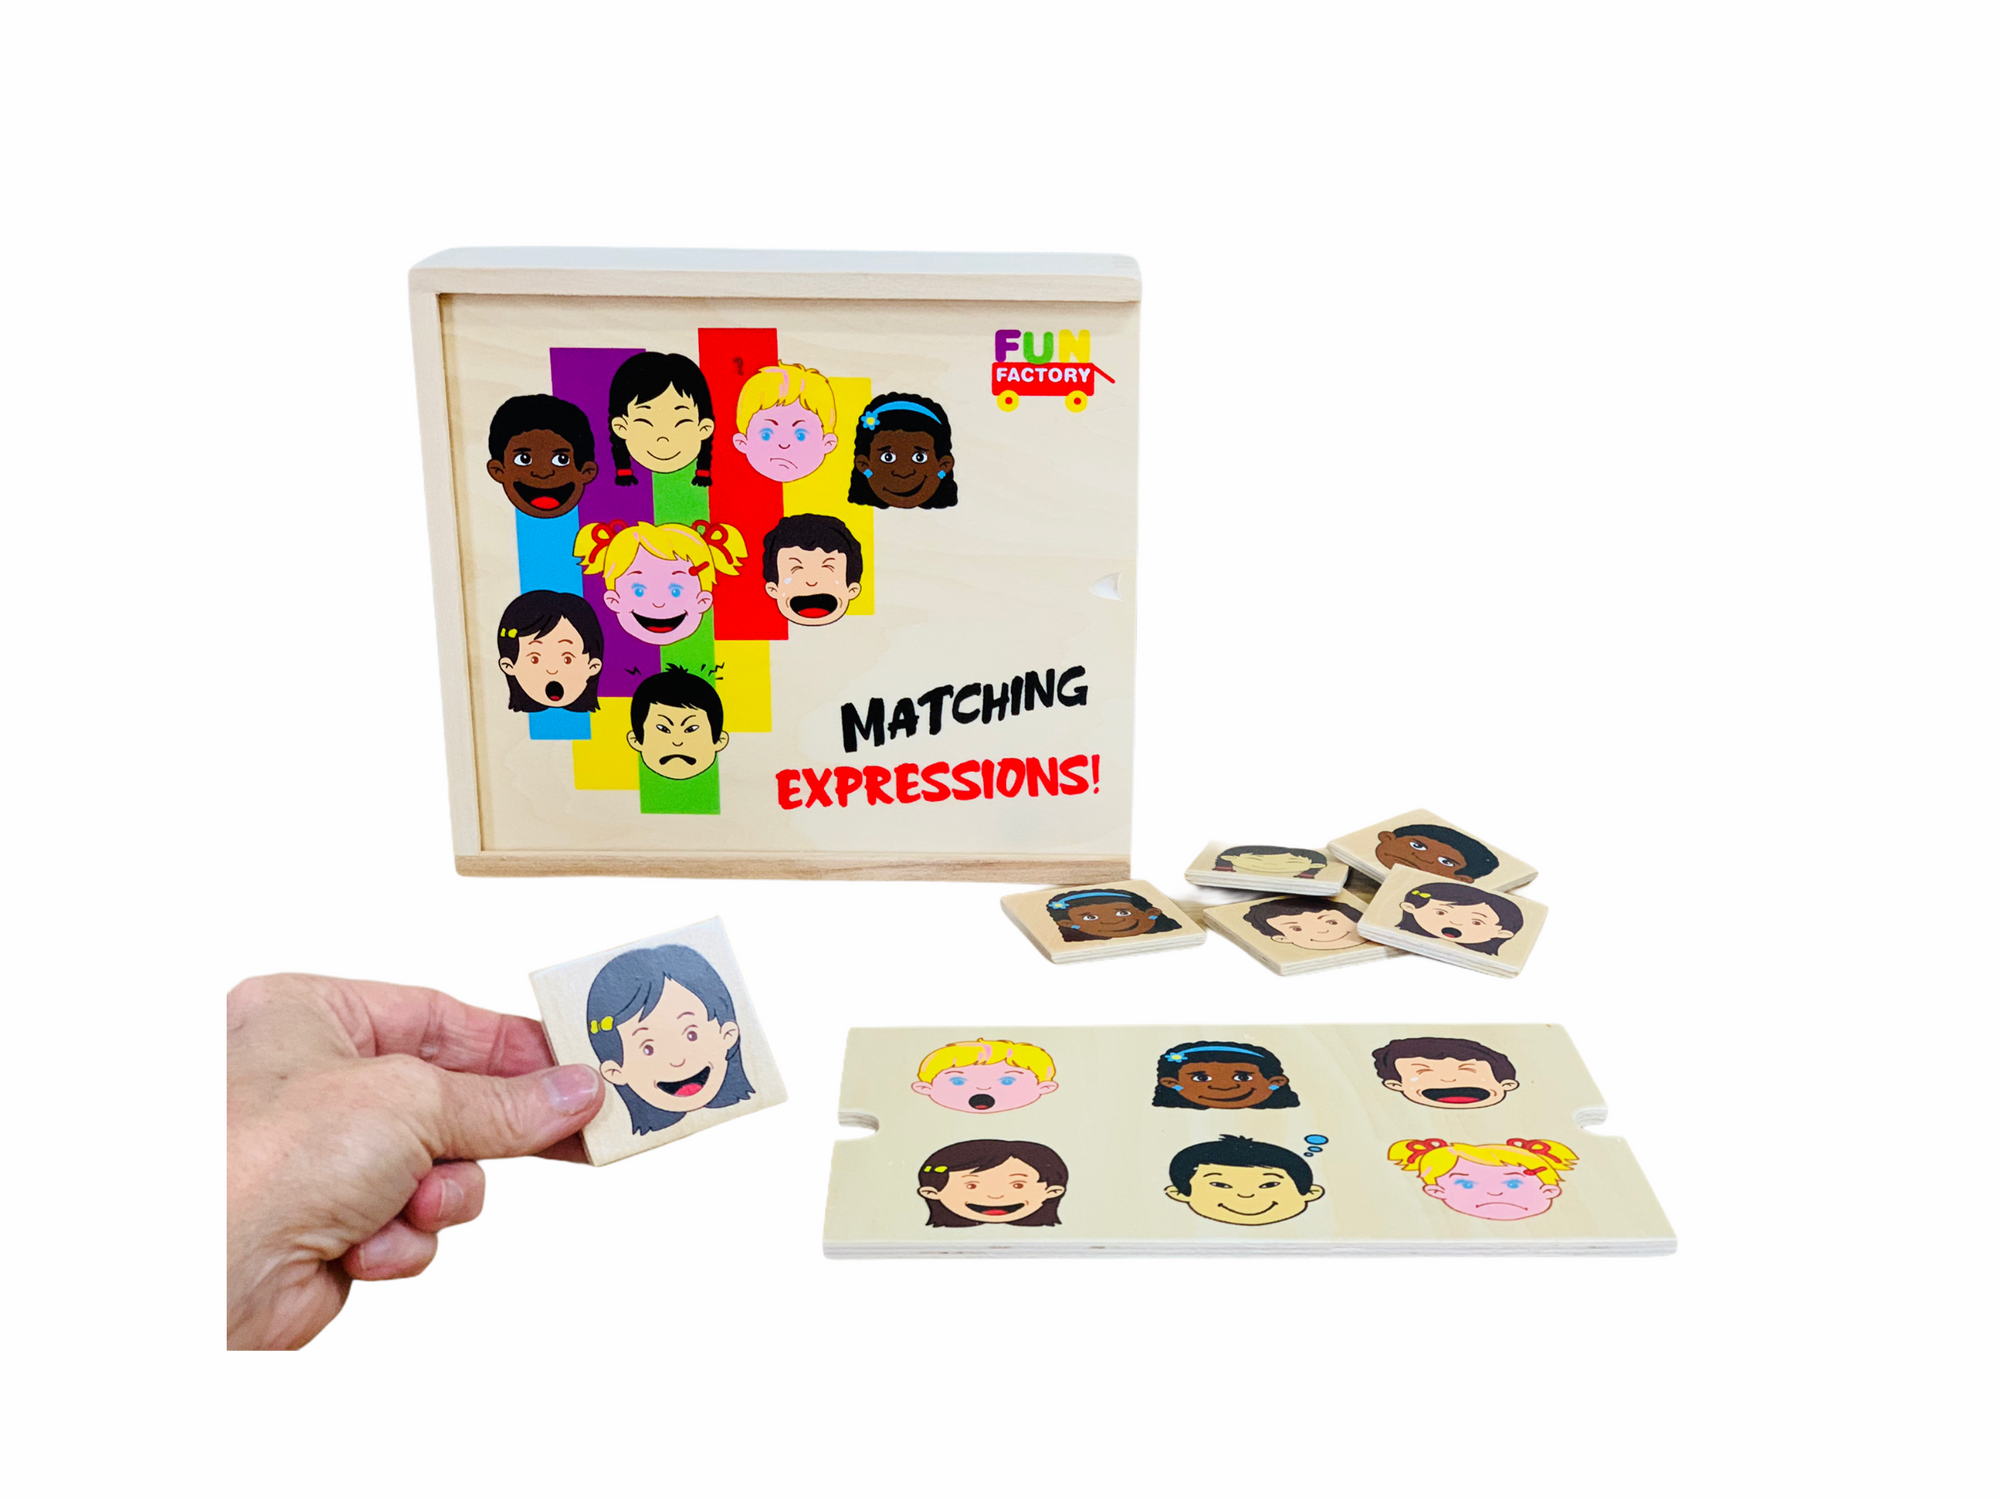 Fun Factory Matching Expressions Game with game cards laid out with wooden tiles showing facial expressions and hand holding a tile showing a happy girl